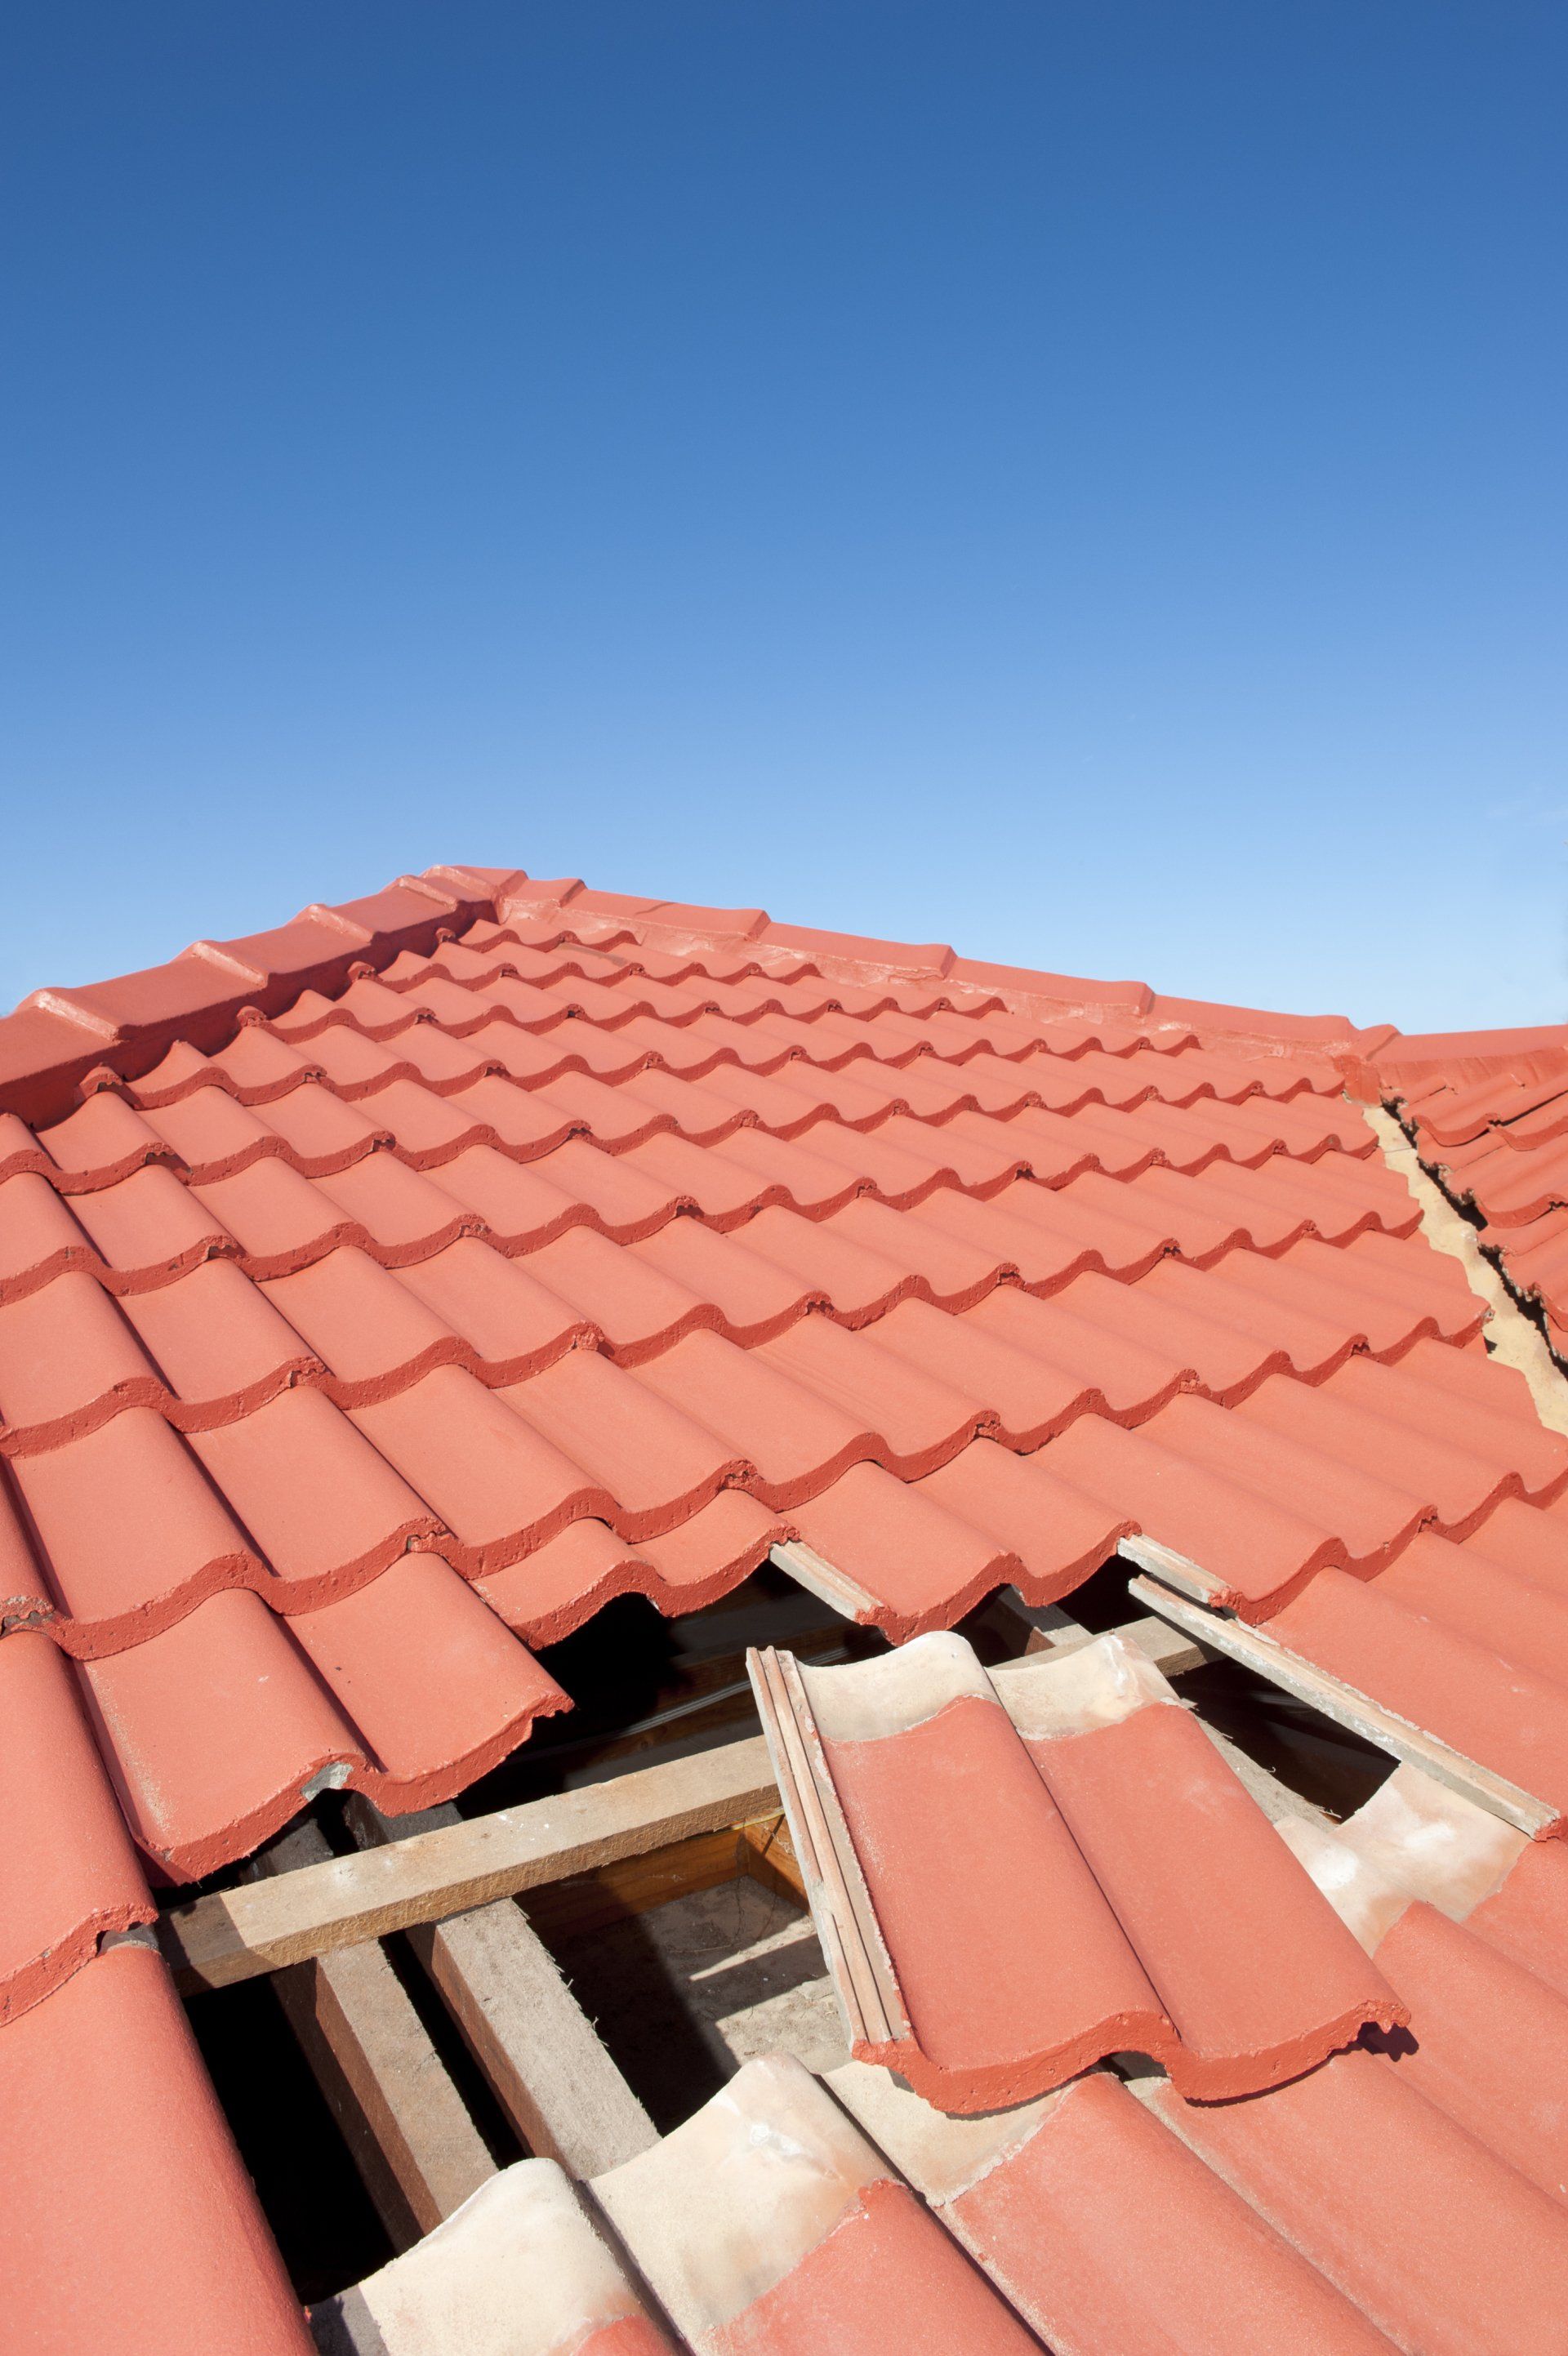 Know what to expect when it comes to your roof damage